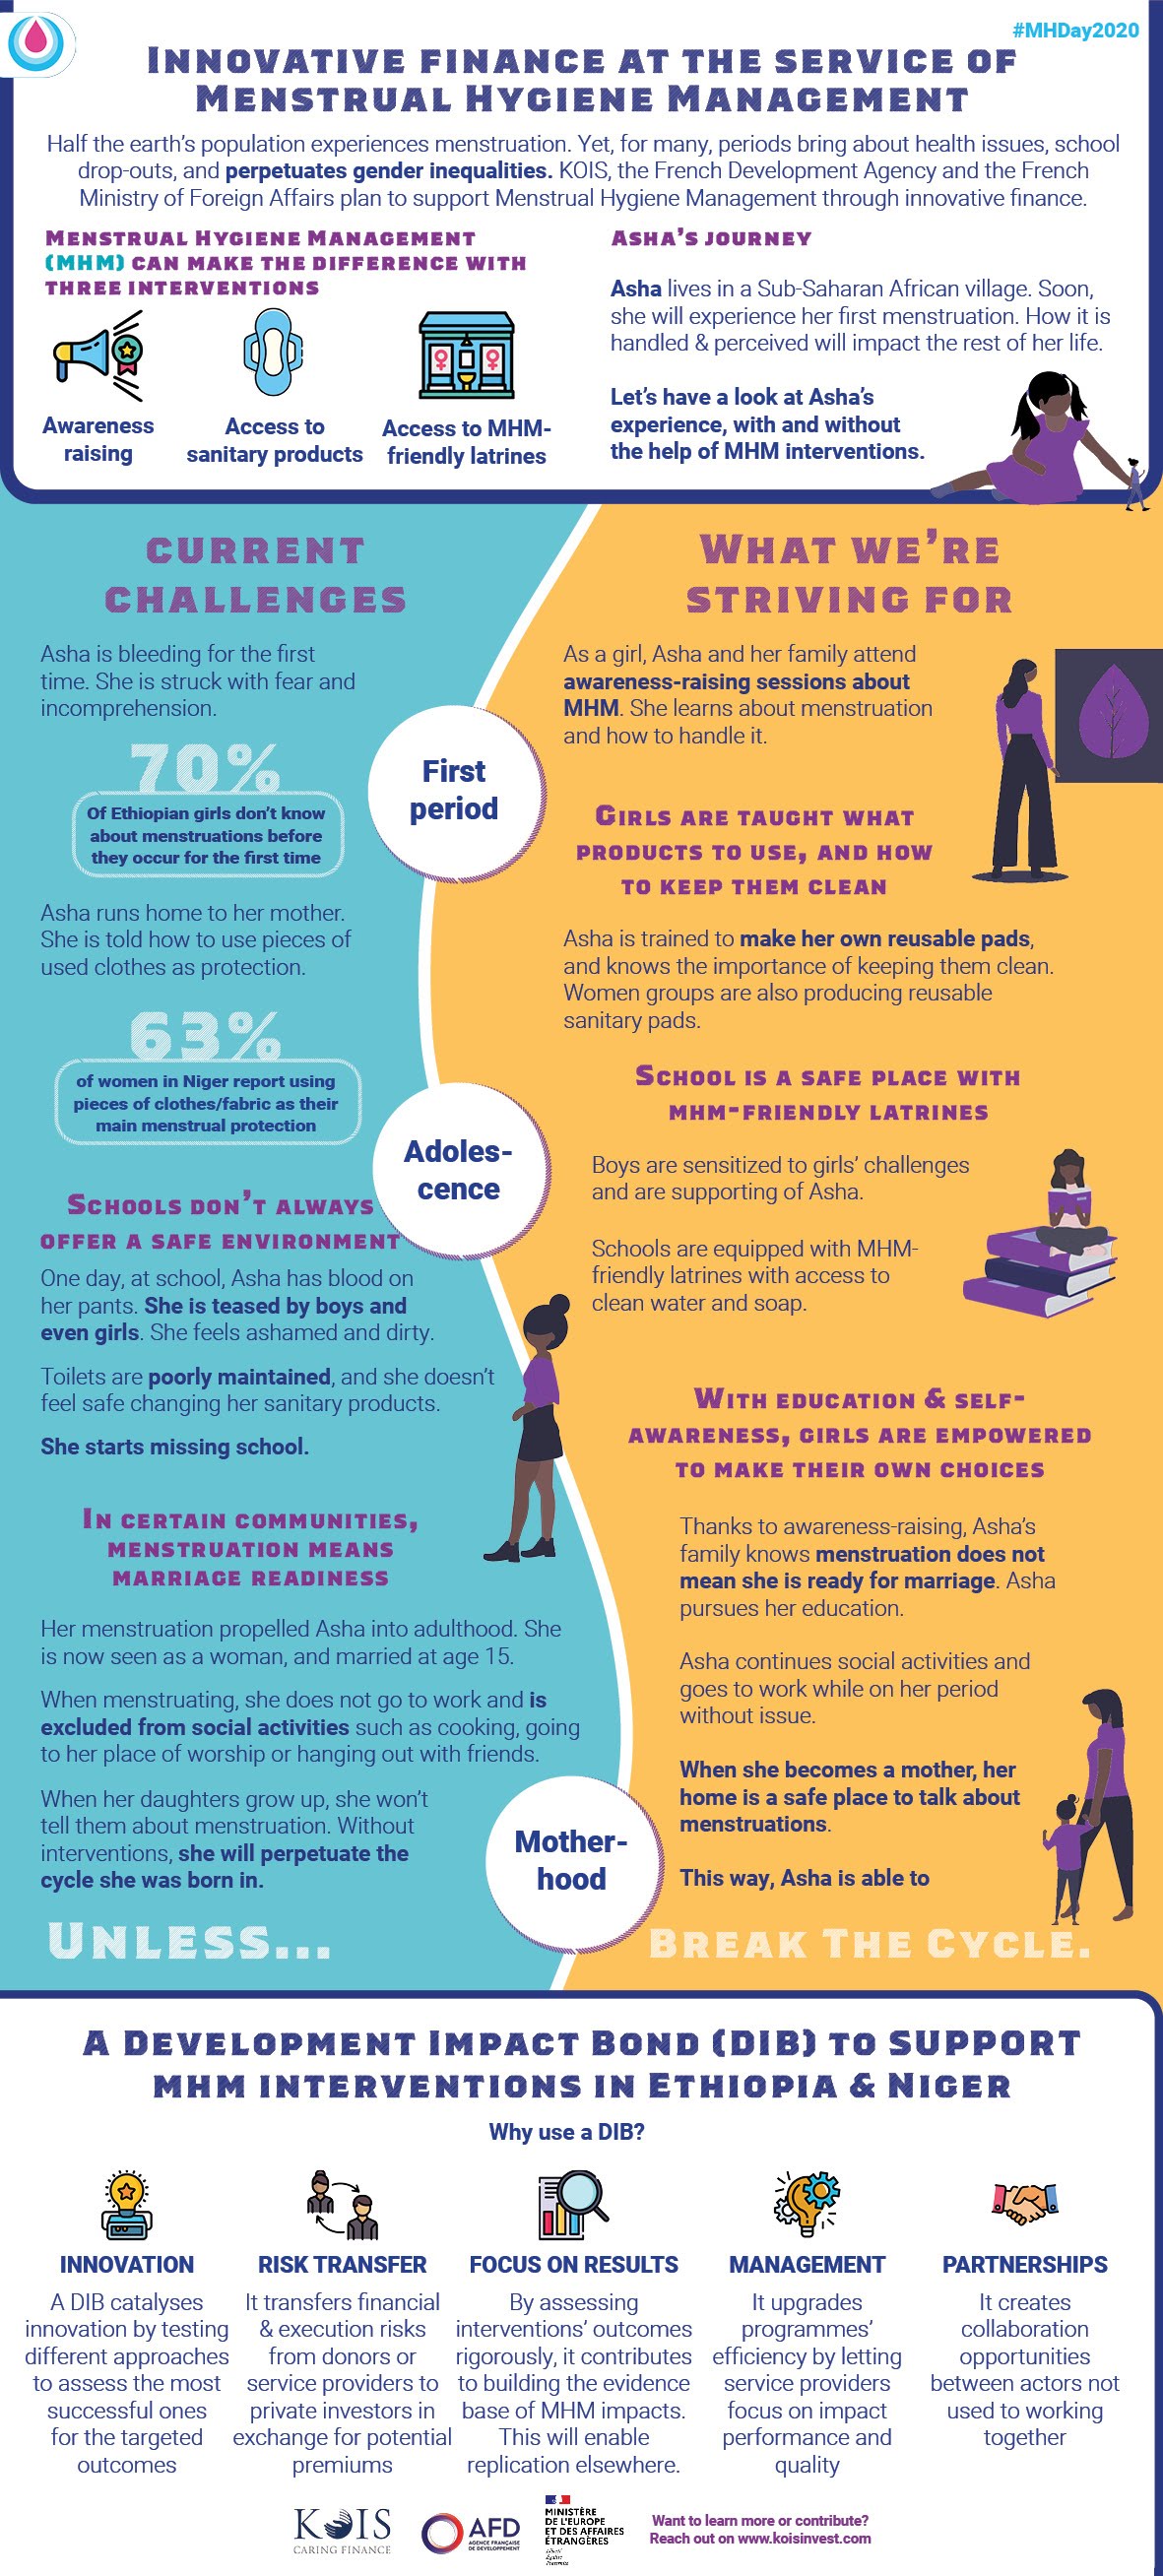 Infographic on Menstrual Hygiene Management interventions and KOIS' innovative finance way to support them